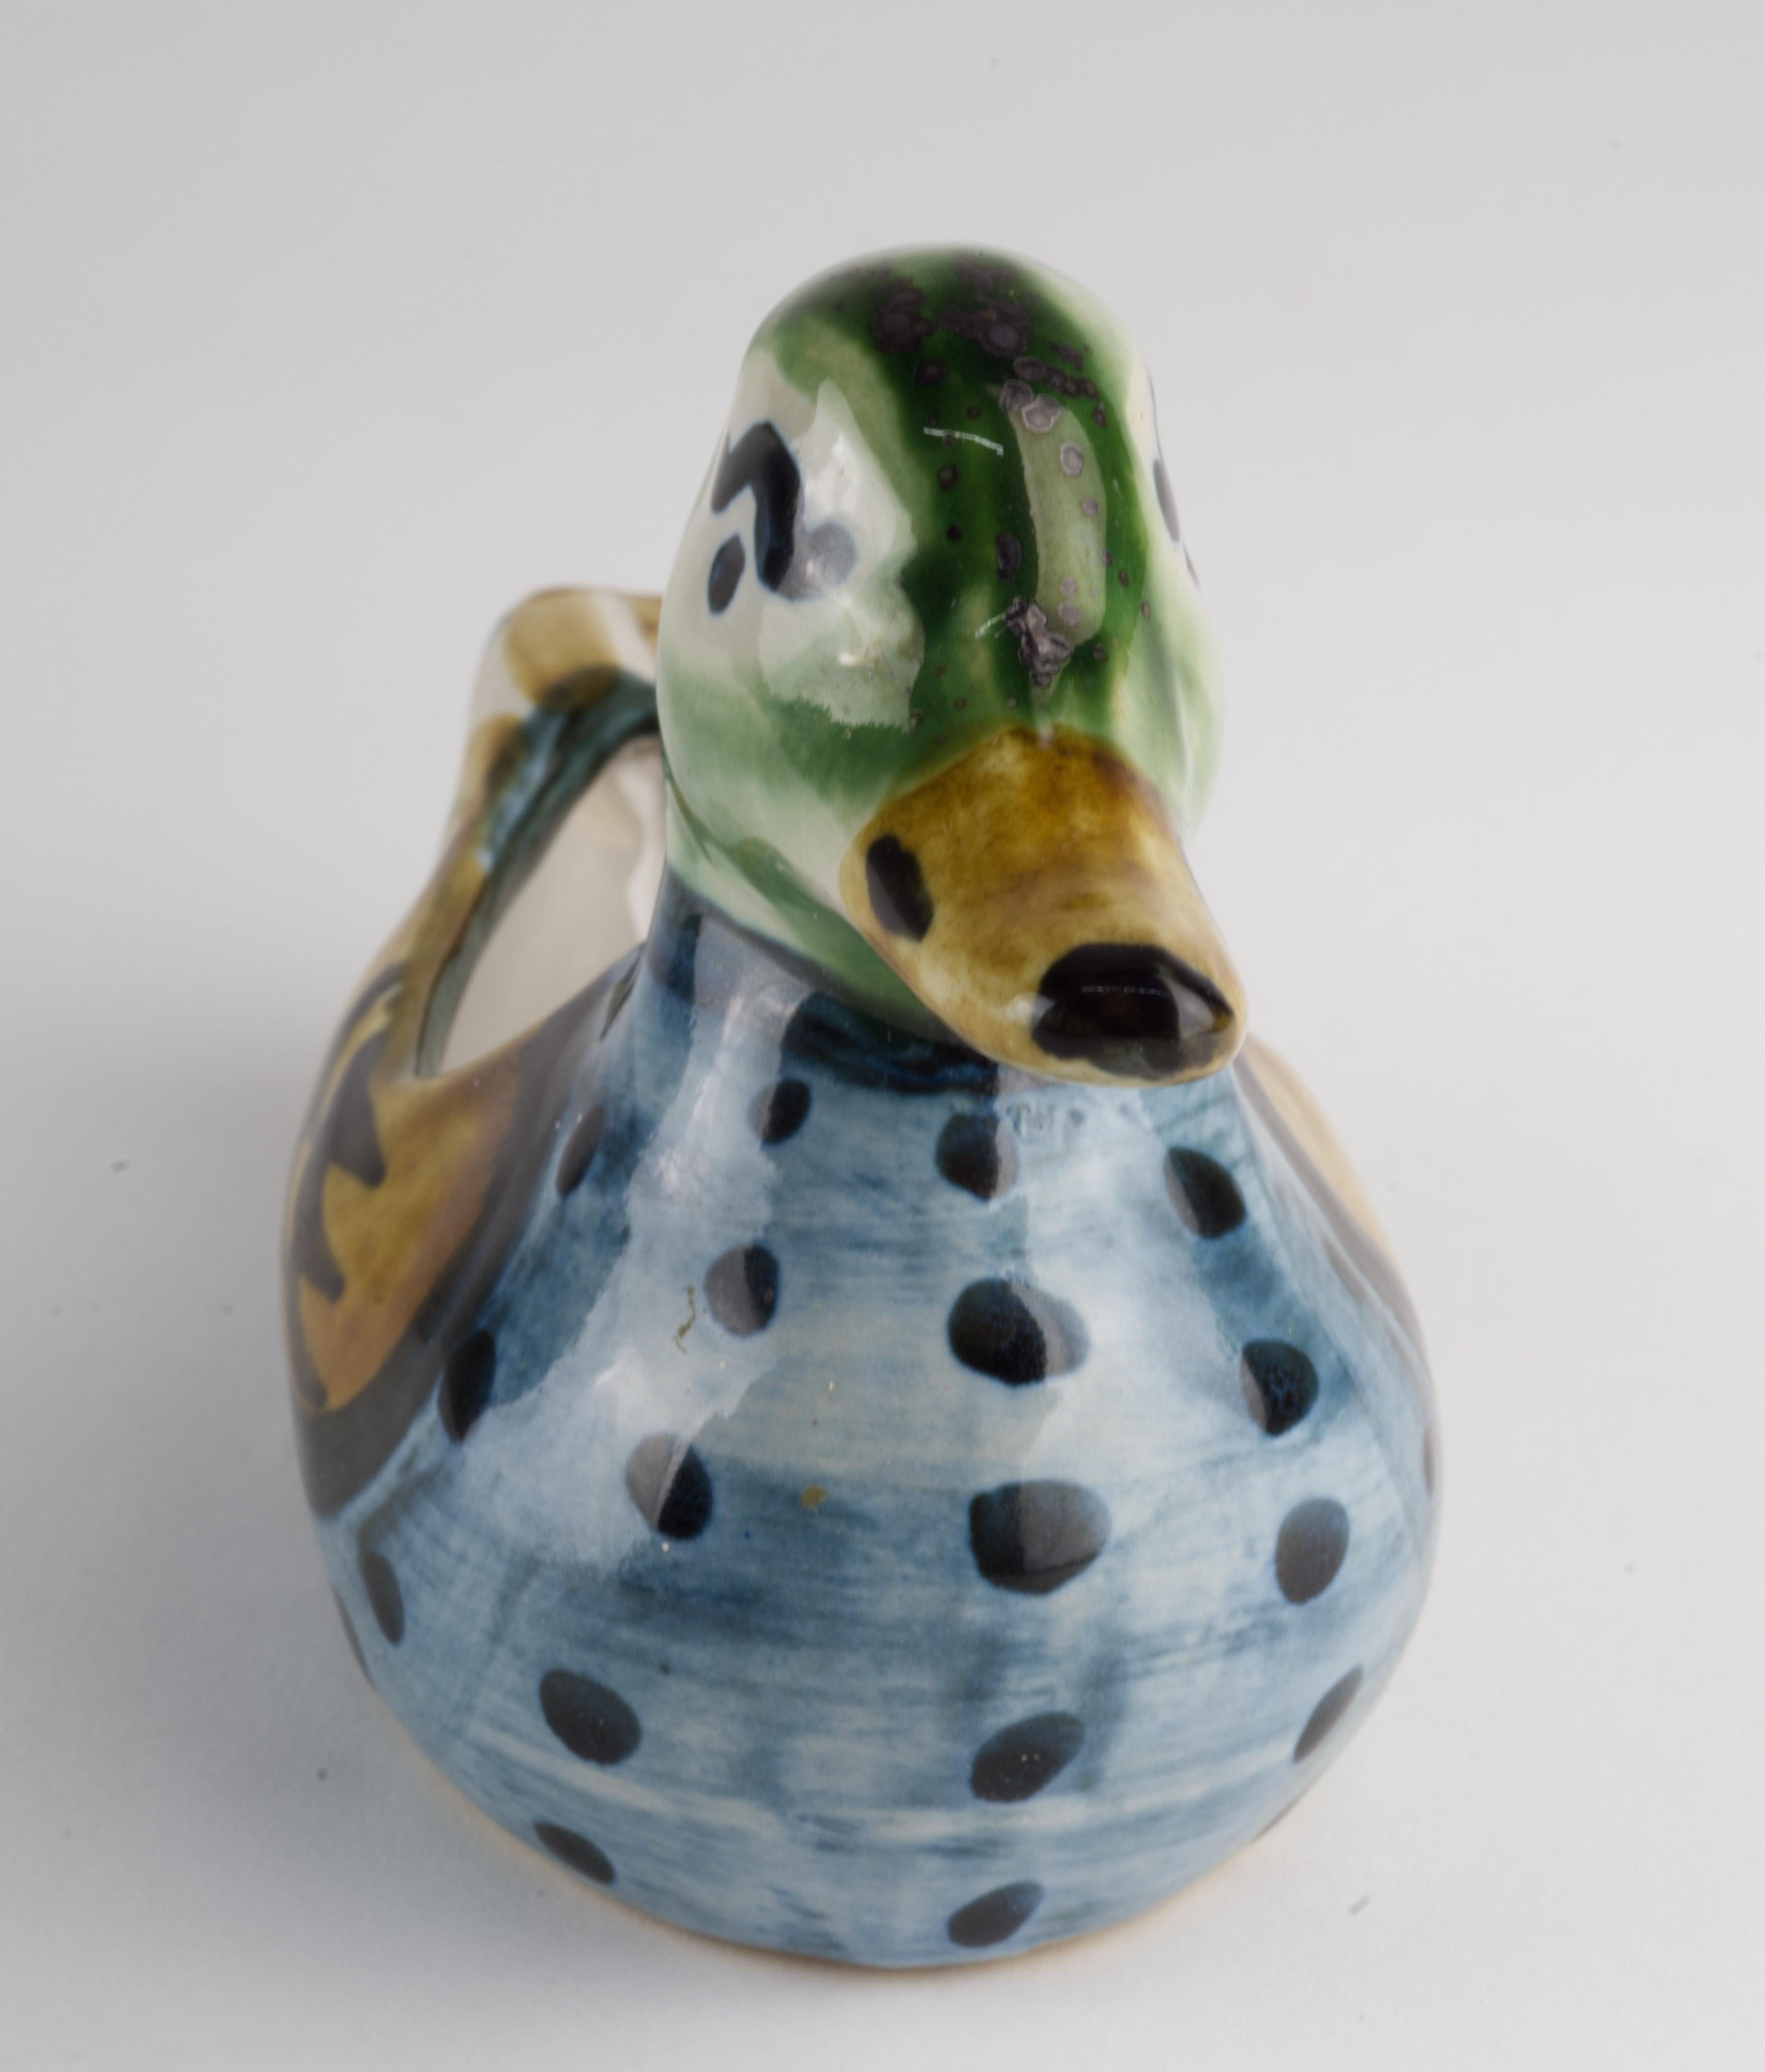  Duck shaped ashtray or catchall was handmade by Hadley Pottery in Louisville, Kentucky. The figurine is hand painted in green, blue, and yellow palette with anthropomorphic eyes that give it playful, endearing expression. The inside of ash